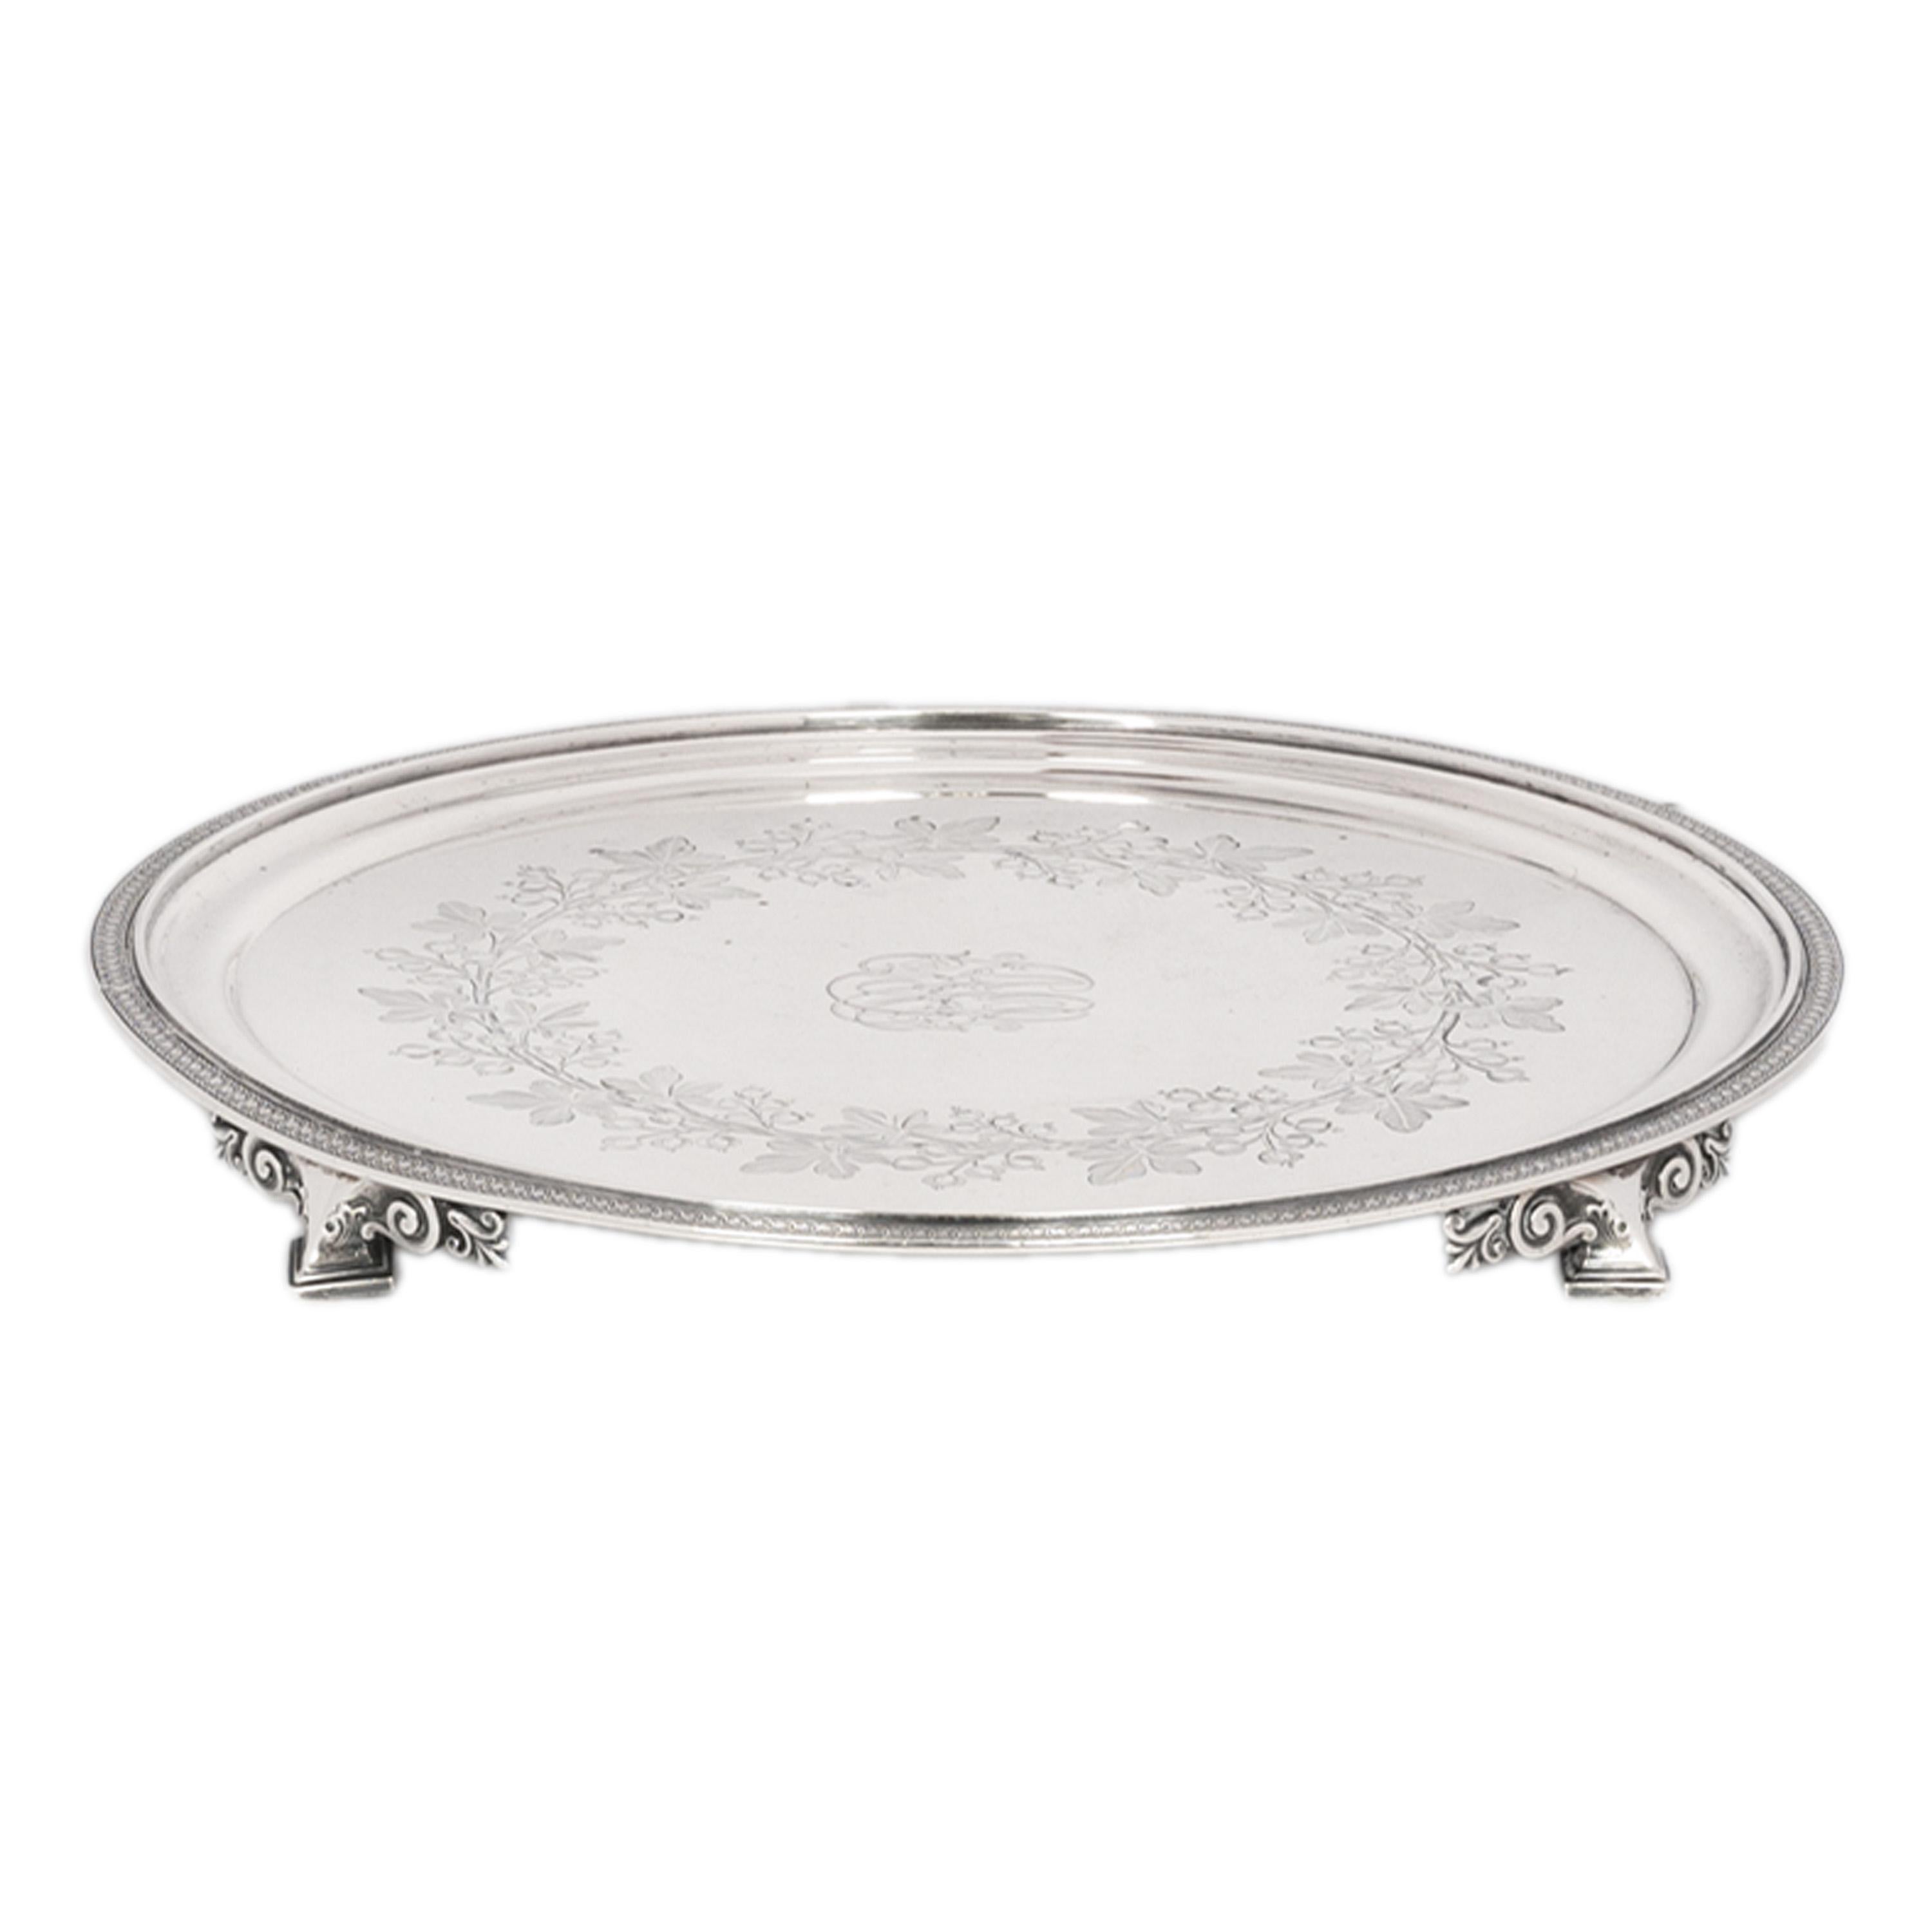 Argent sterling Antique Sterling Silver Graved Tiffany & Co Footed Salver Tray New York 1870 en vente